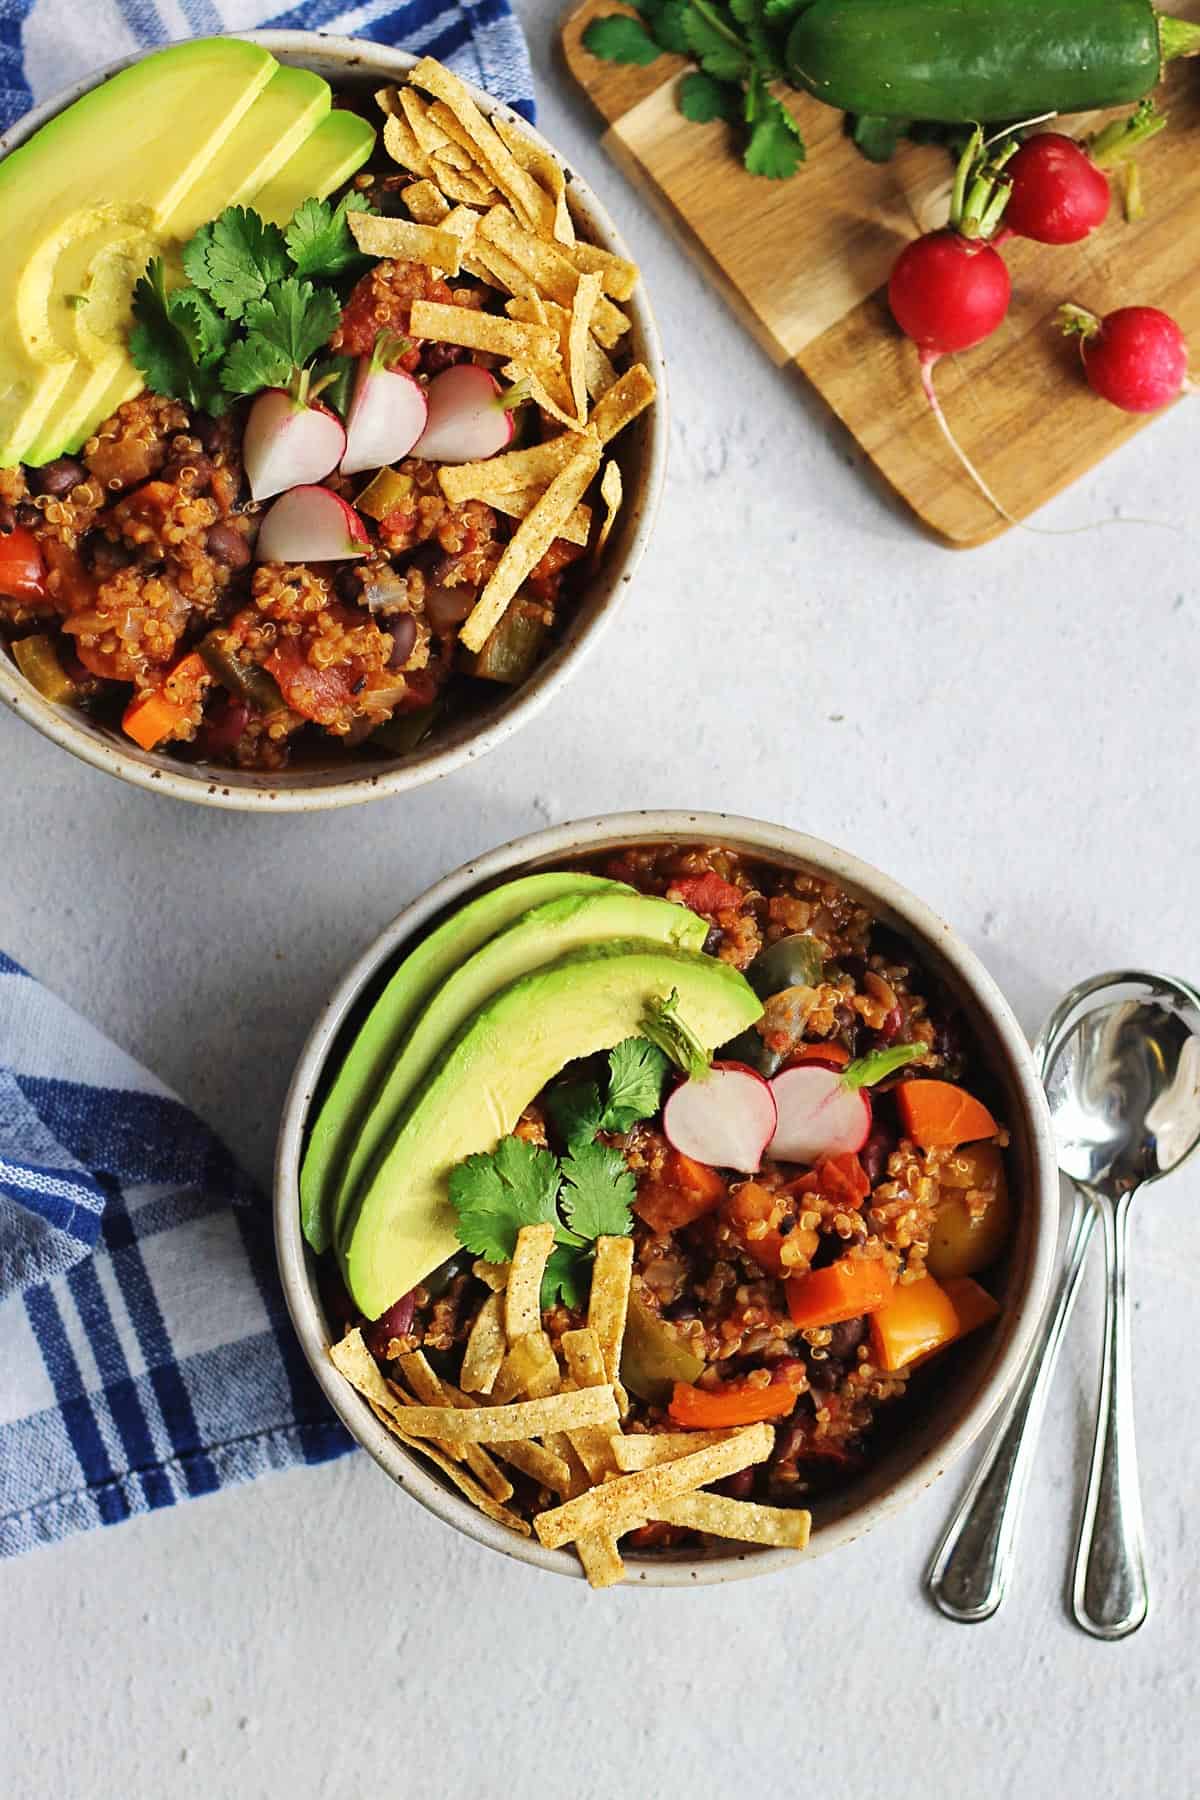 A photo of a bowl of quinoa chili topped with tortilla strips, radish, and avocado slices.